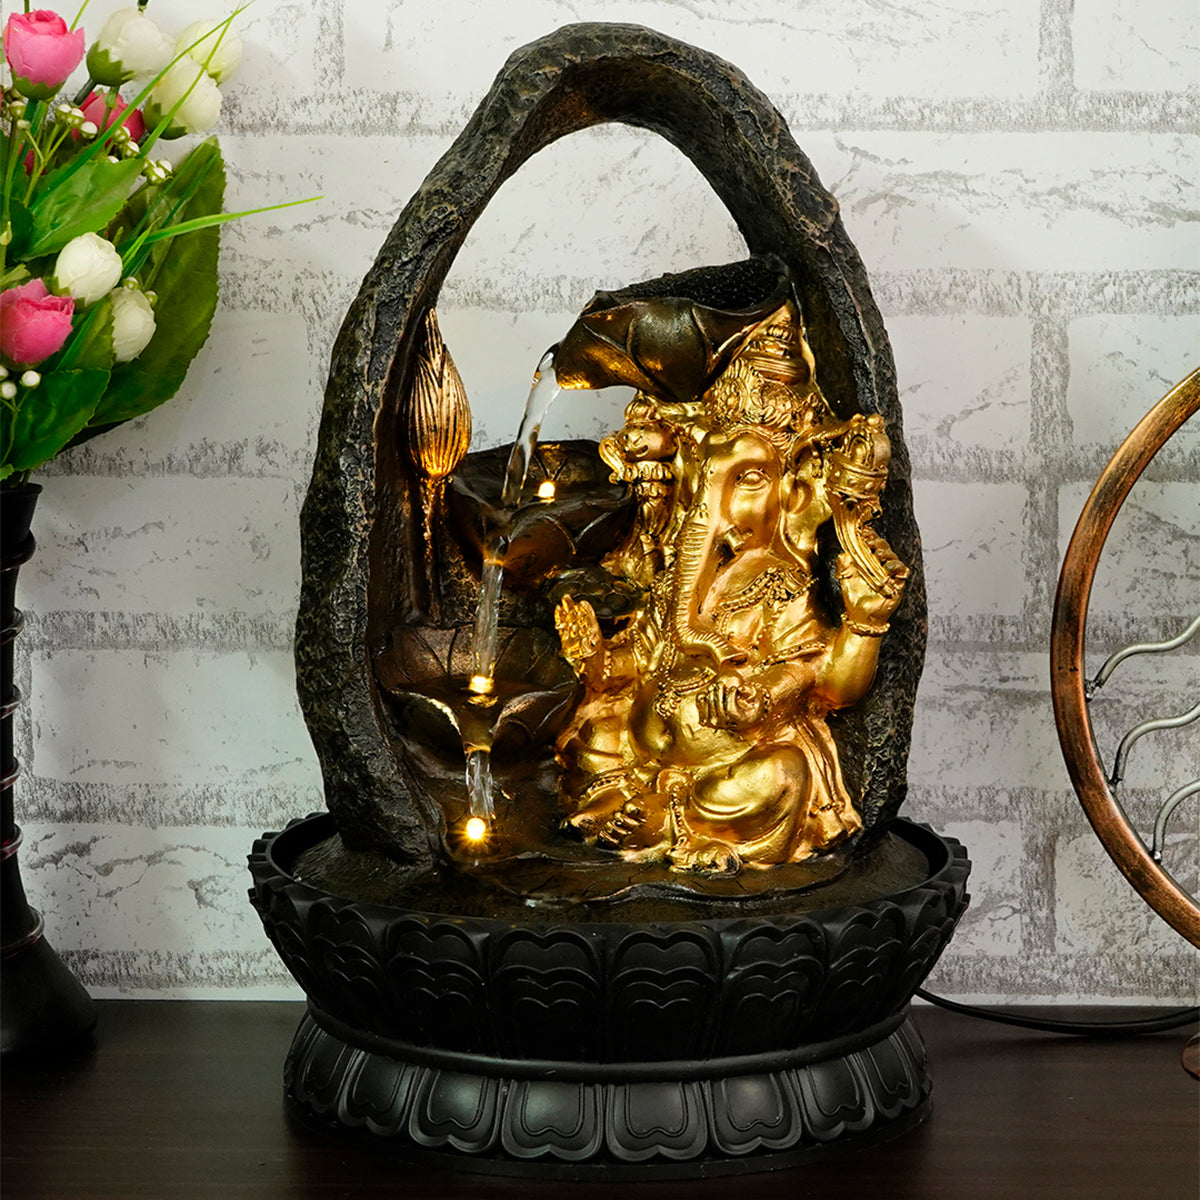 Polystone Black and Golden Decorative Lord Ganesha Idol Water Fountain With Light For Home/Office Décor 5